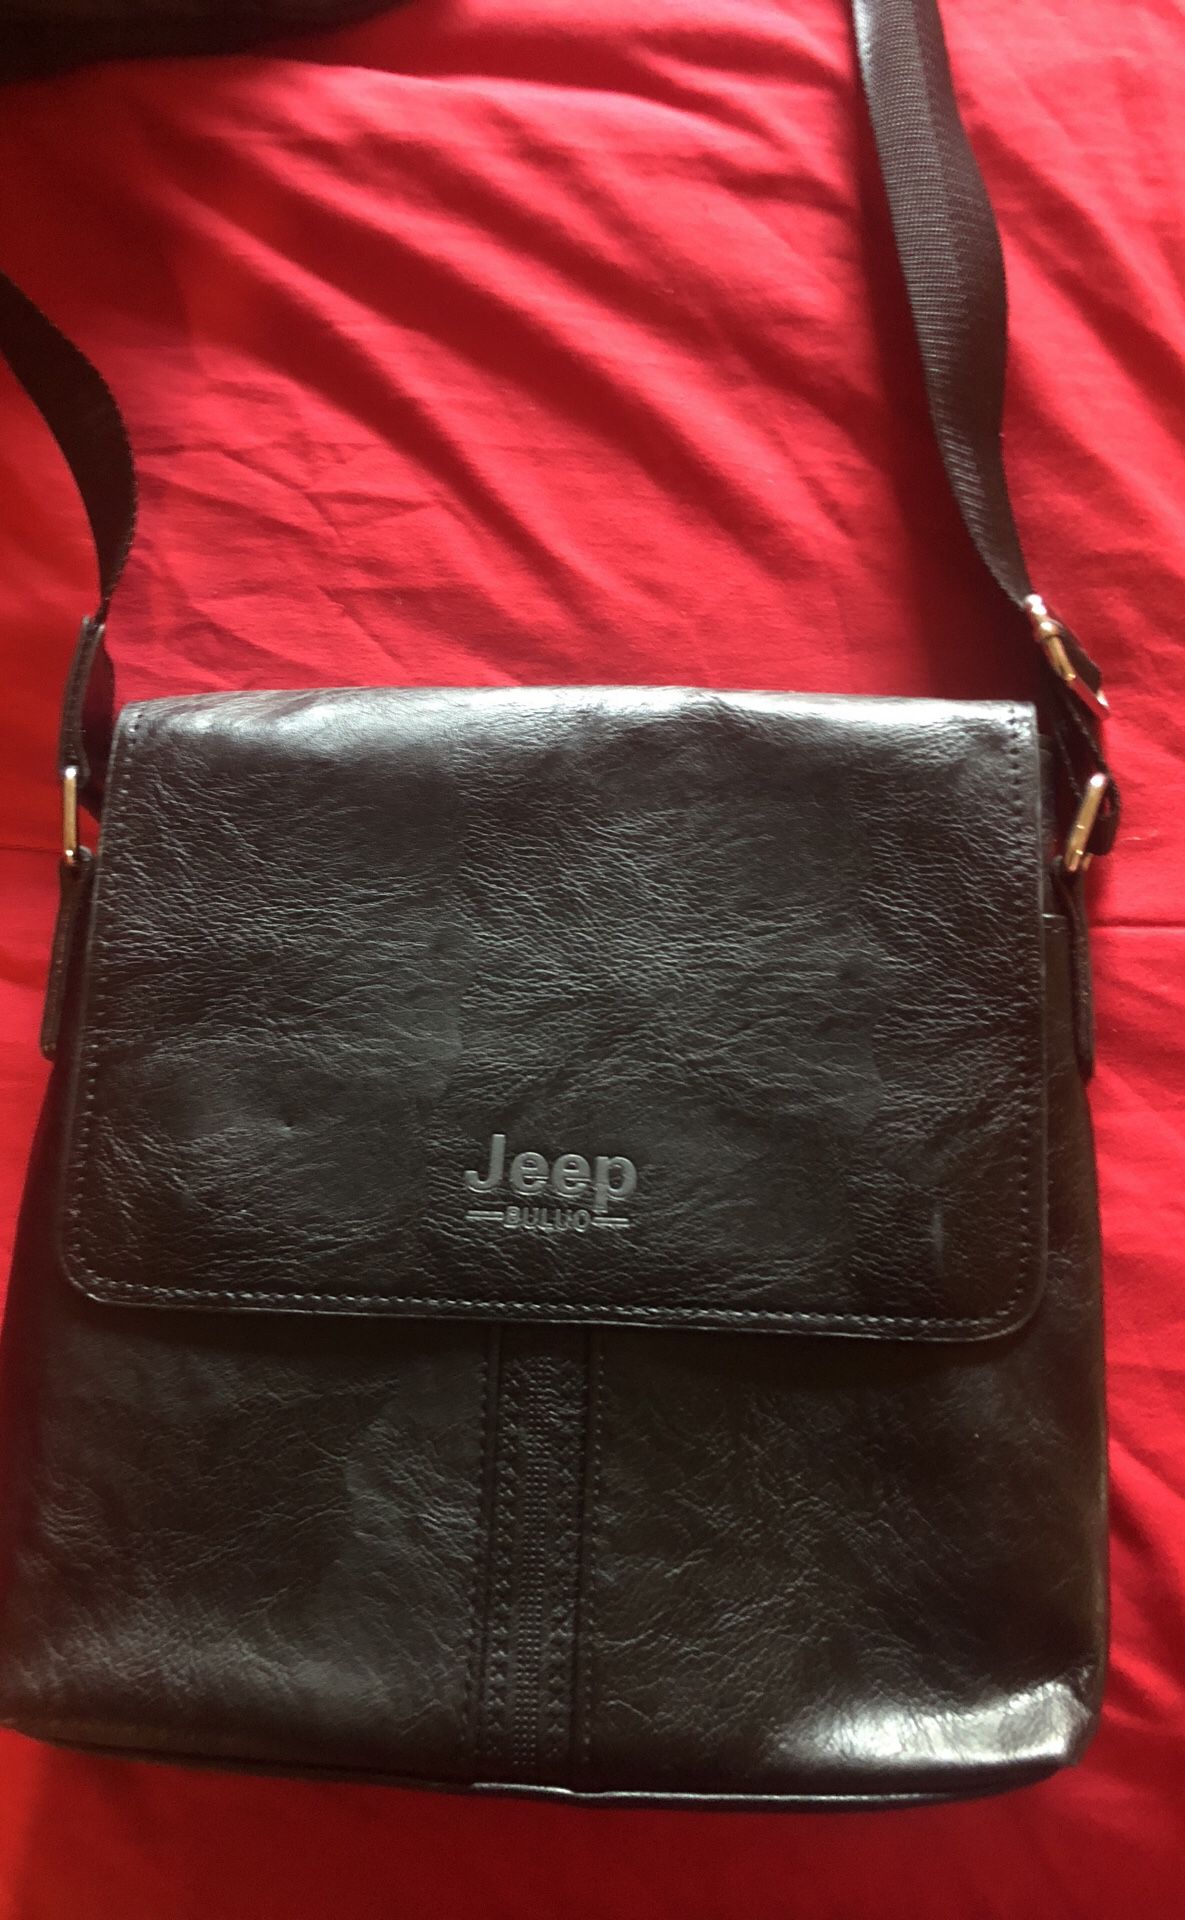 Jeep Bag leather !!!